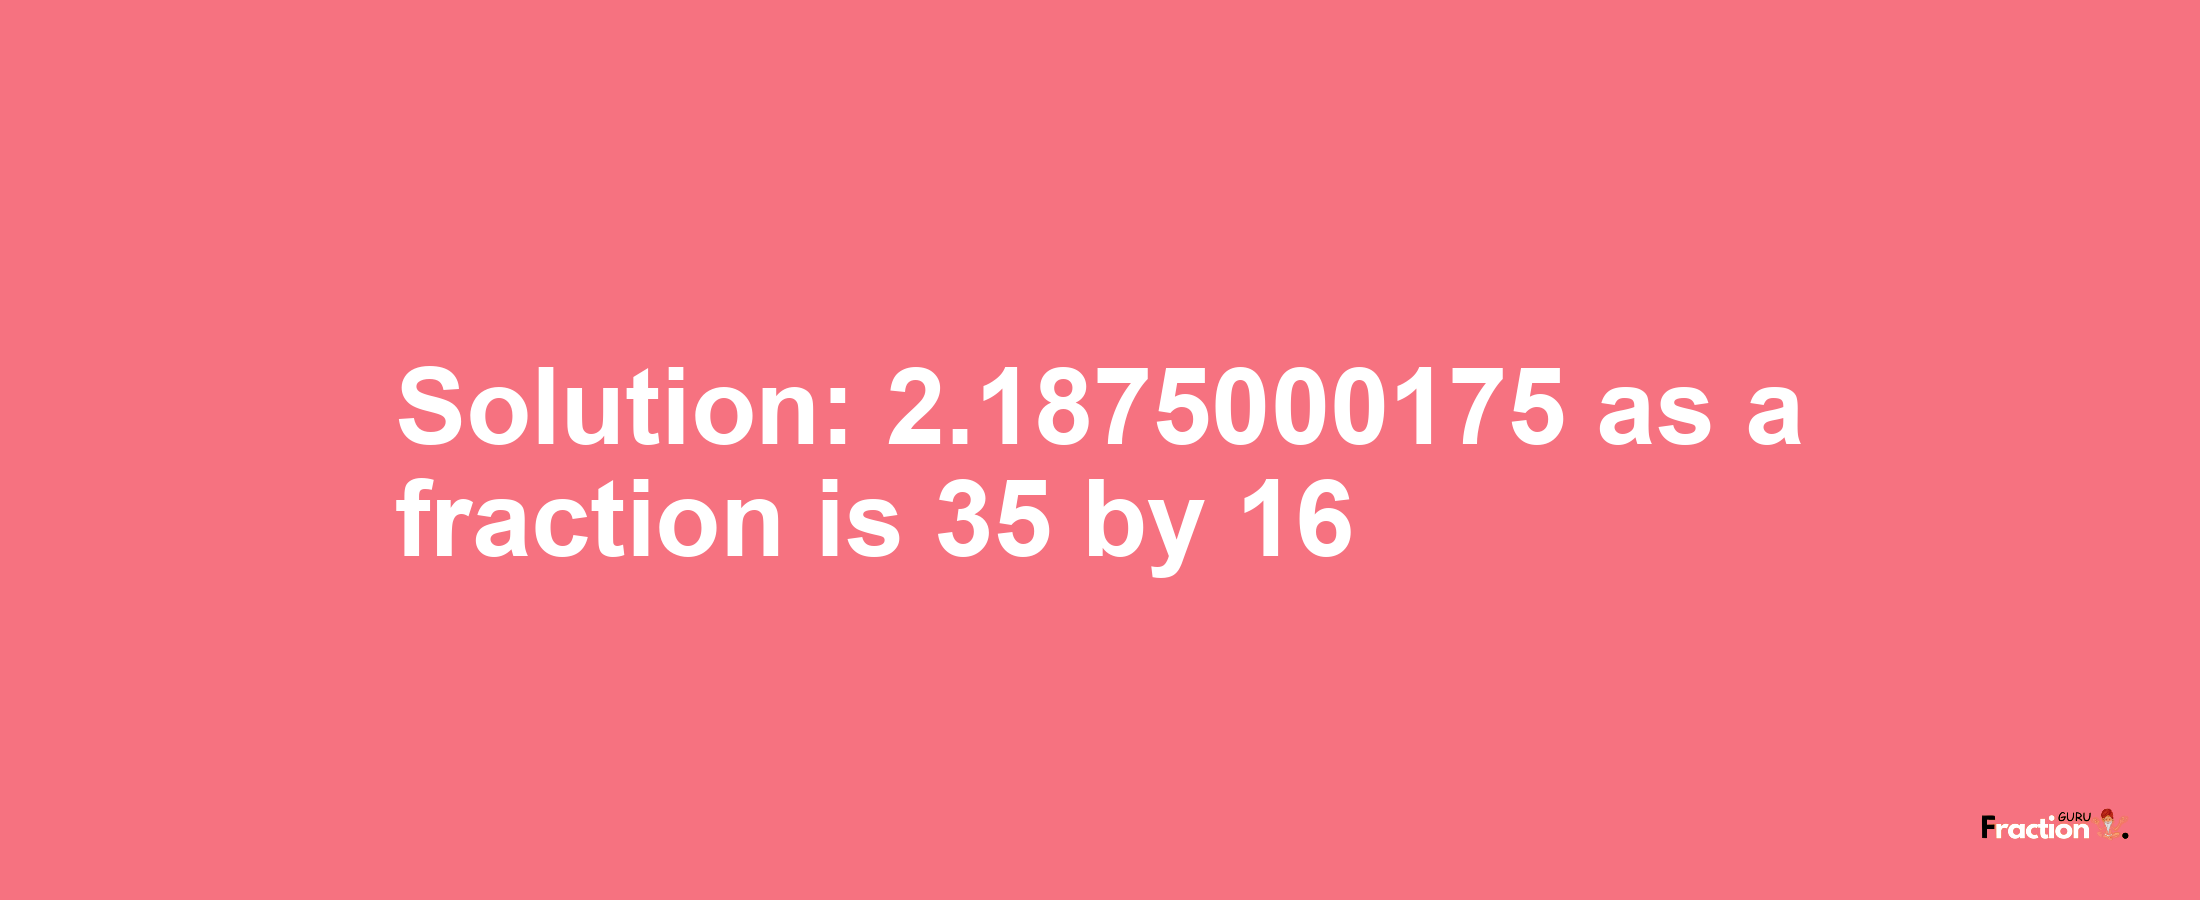 Solution:2.1875000175 as a fraction is 35/16